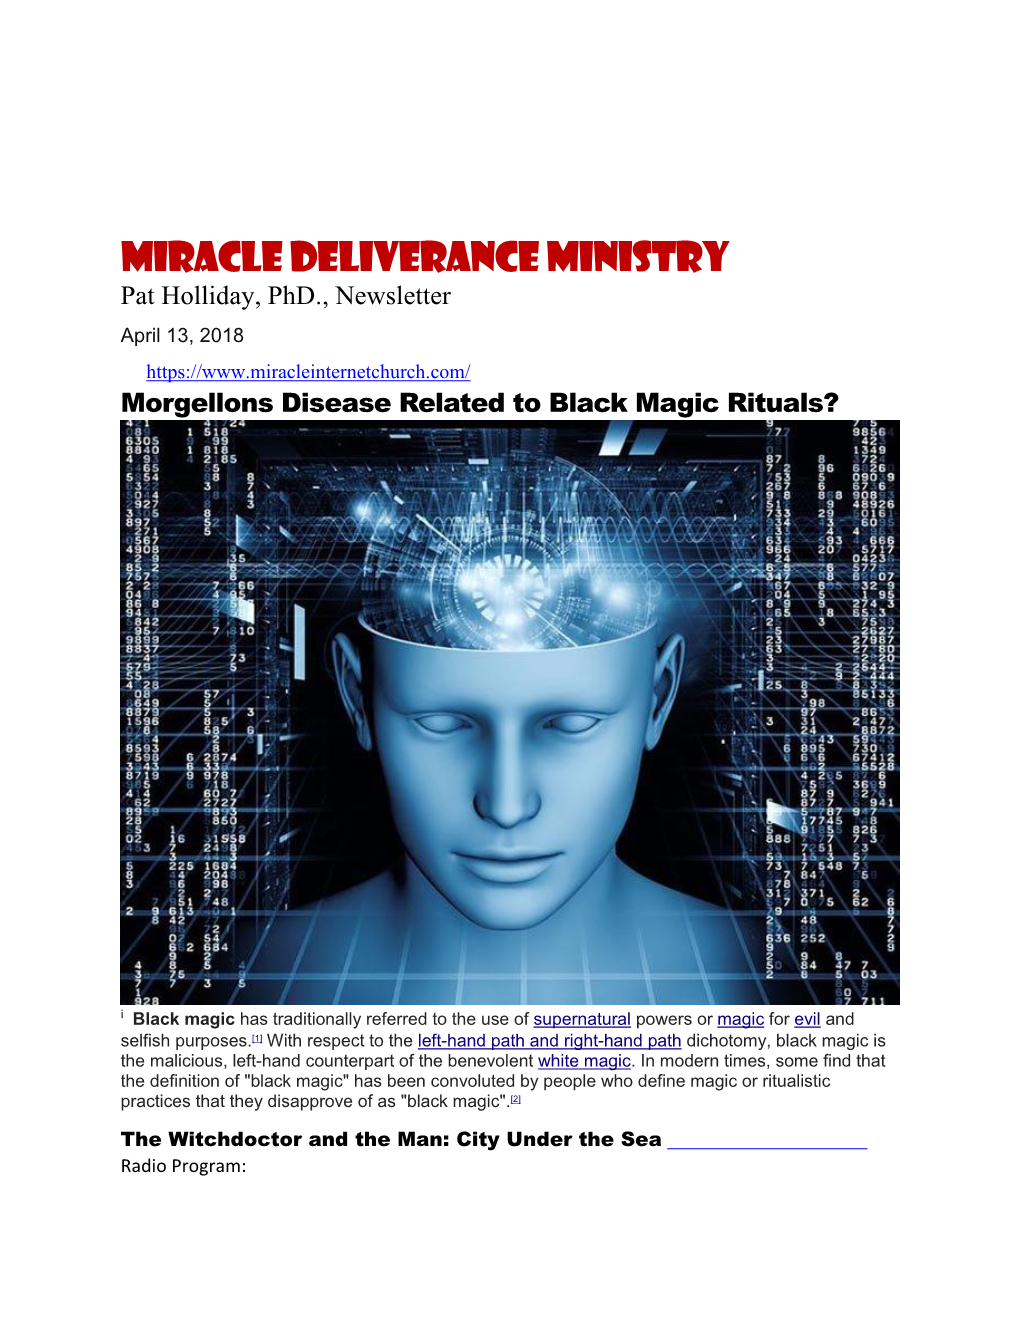 Miracle Deliverance Ministry Pat Holliday, Phd., Newsletter April 13, 2018 Morgellons Disease Related to Black Magic Rituals?